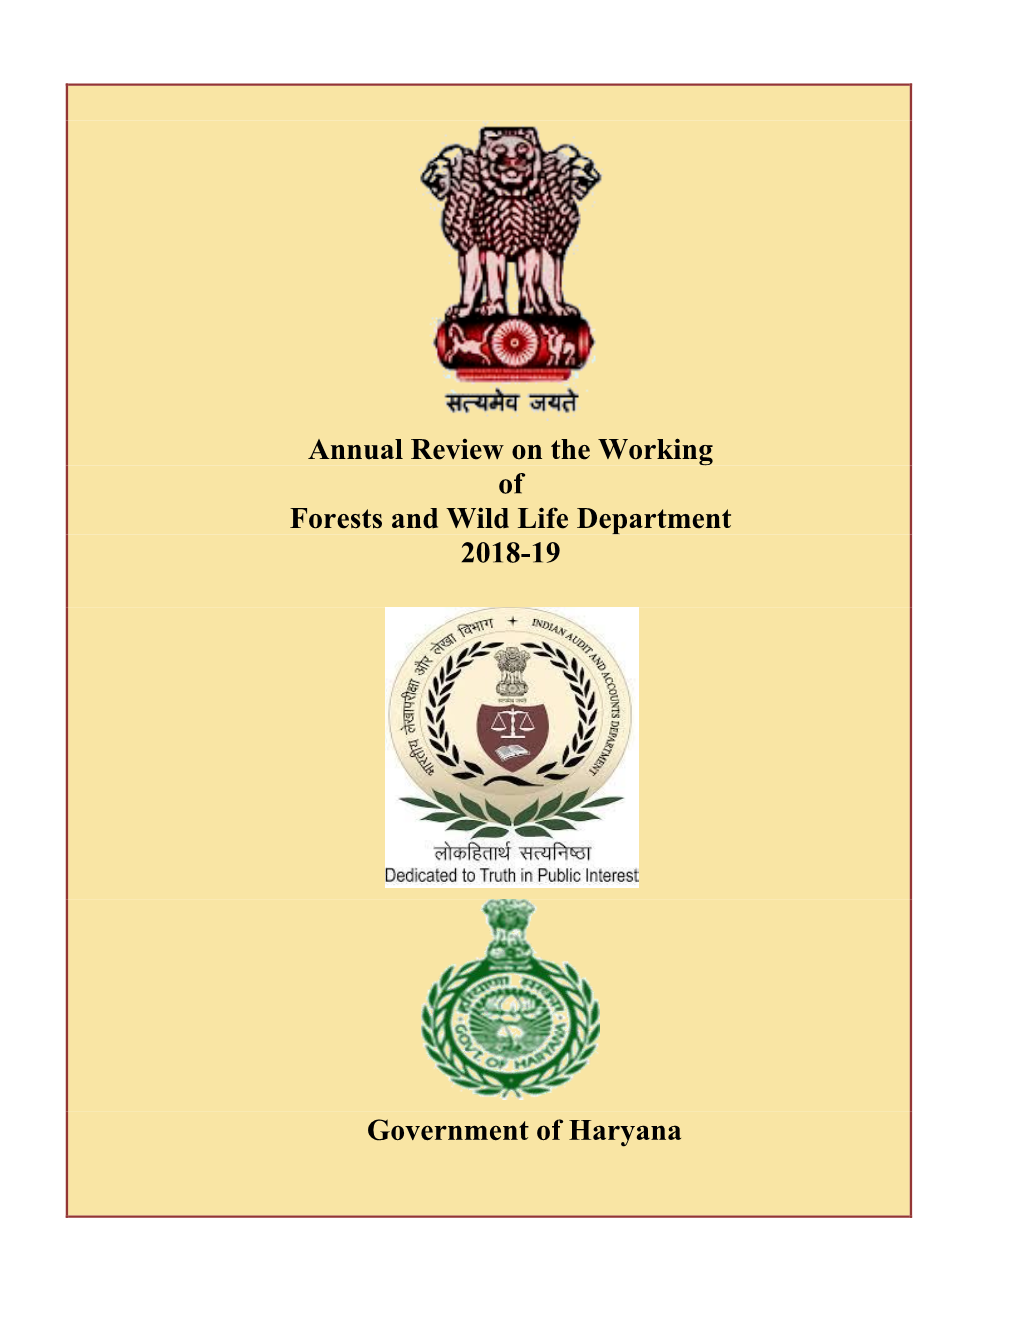 Annual Review on the Working of Forests and Wild Life Department 2018-19